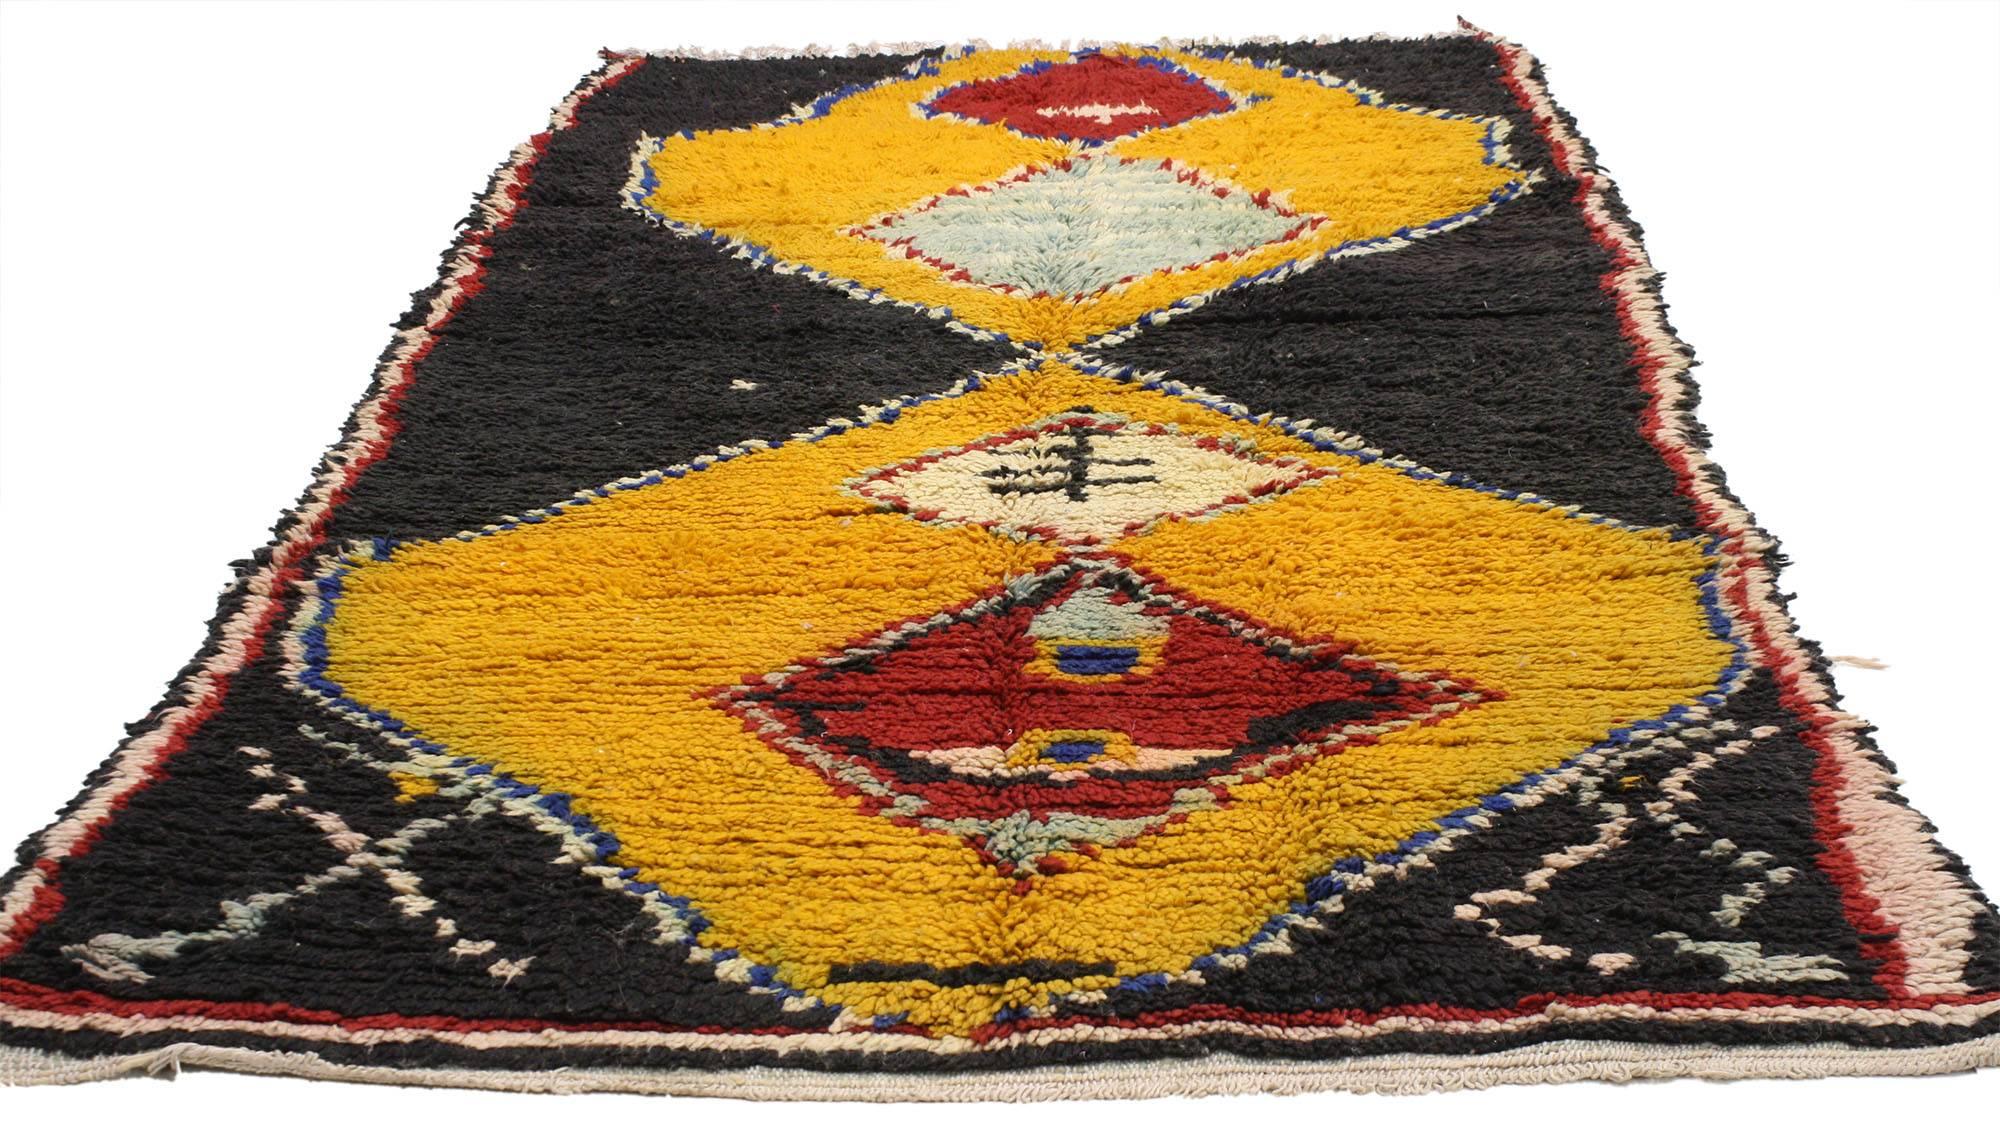 20583 vintage Berber Moroccan rug with tribal style. Jet black sets the stage for diamonds colored in intense shades of yellow and red. The stark contrast of the colors woven into this vintage Berber Moroccan rug creates a unique piece to add zest